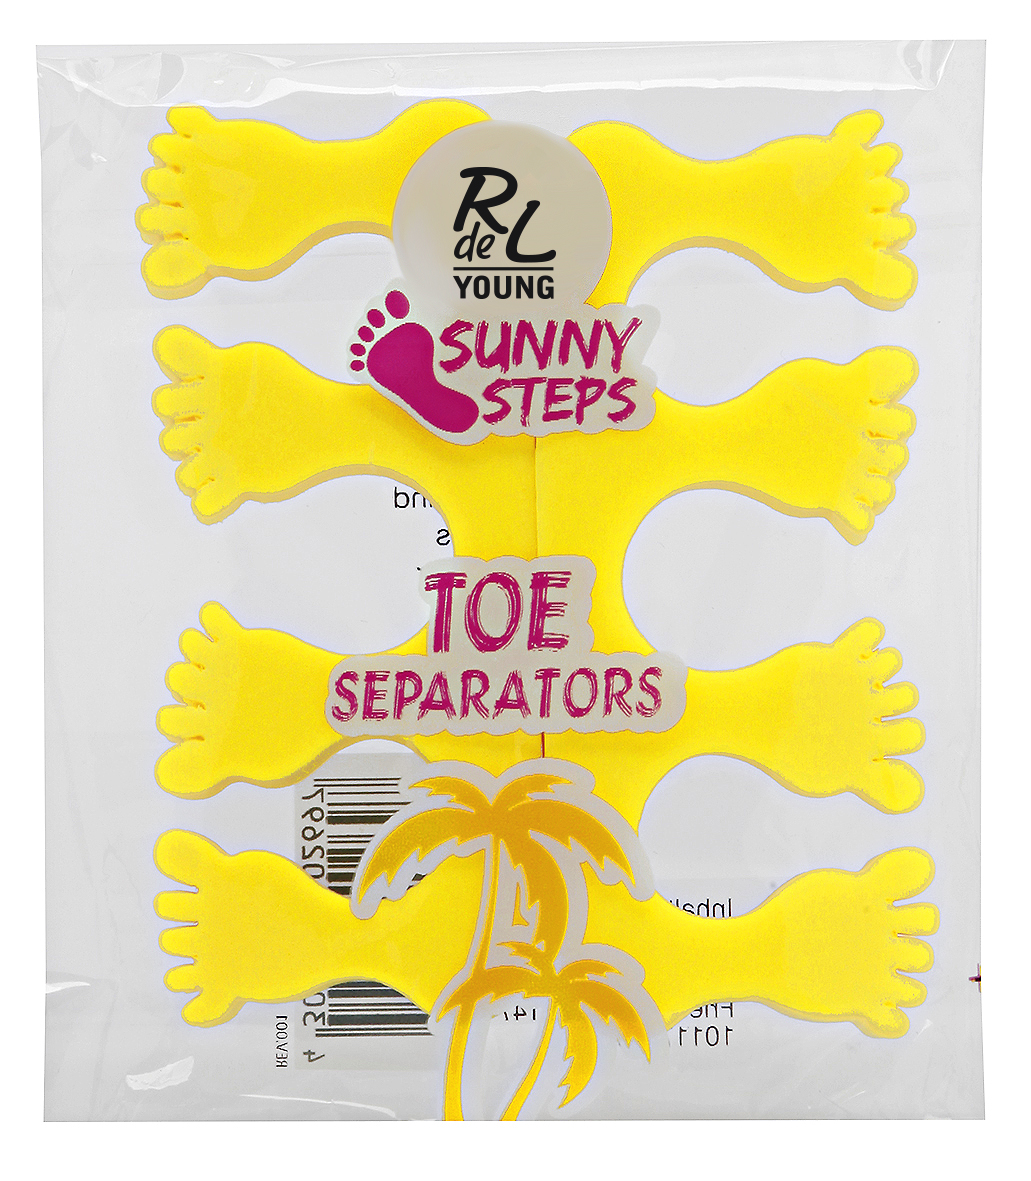 RdeLYoung_SunnySteps_ToeSeperators_Verpackung